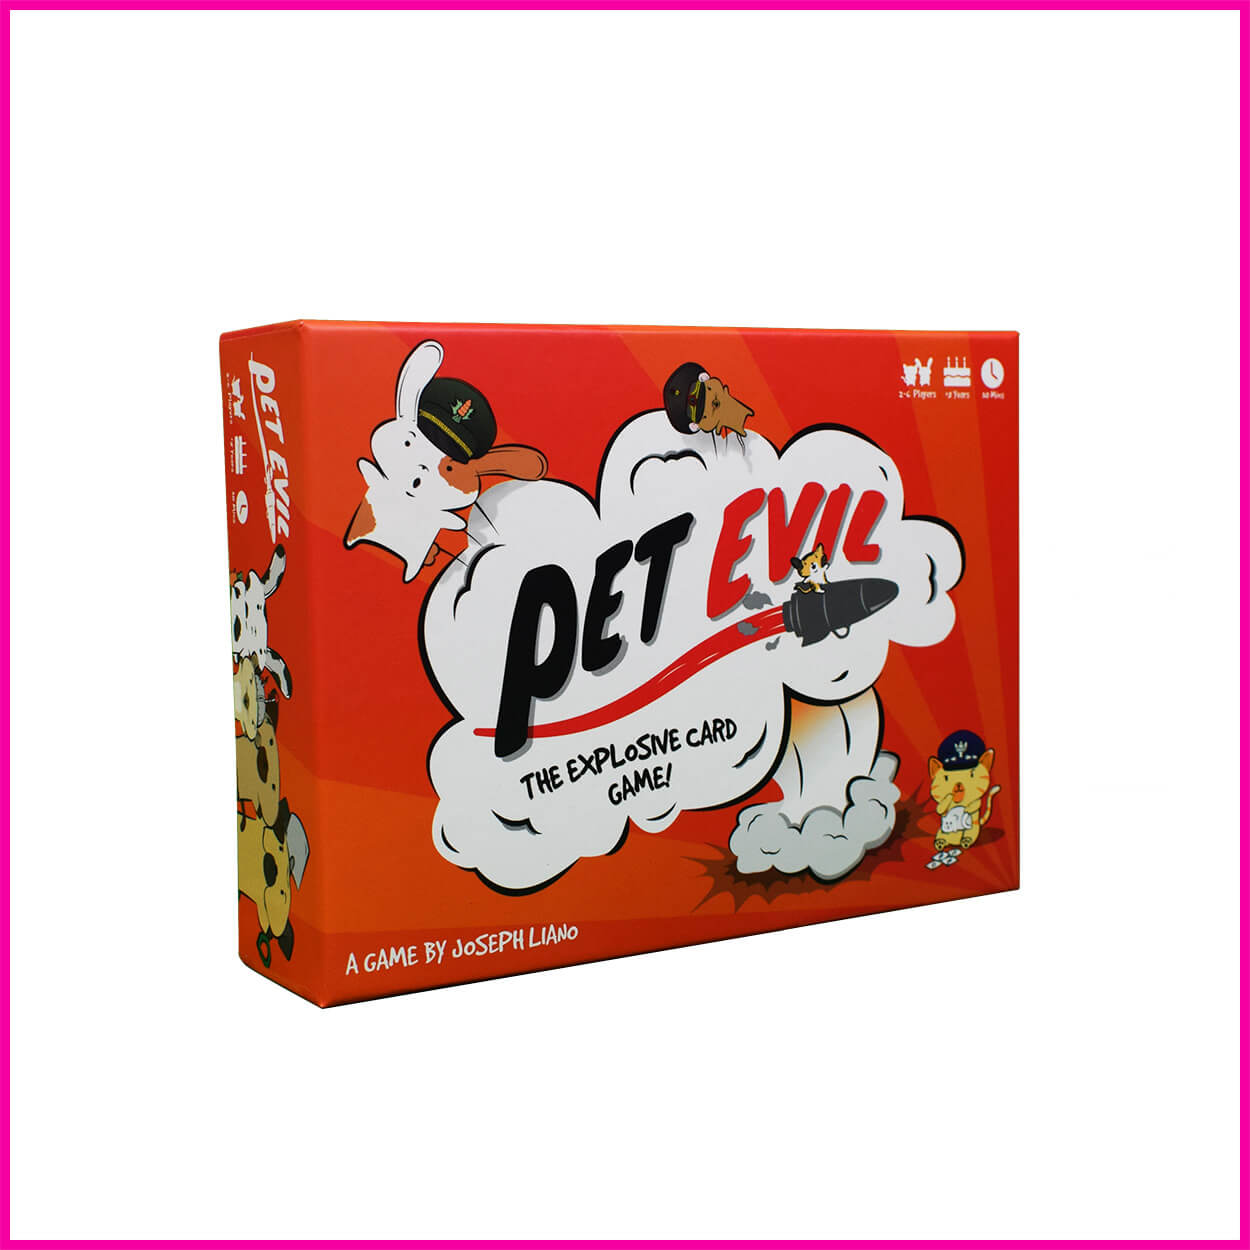 Pet Evil The Explosive Card Game